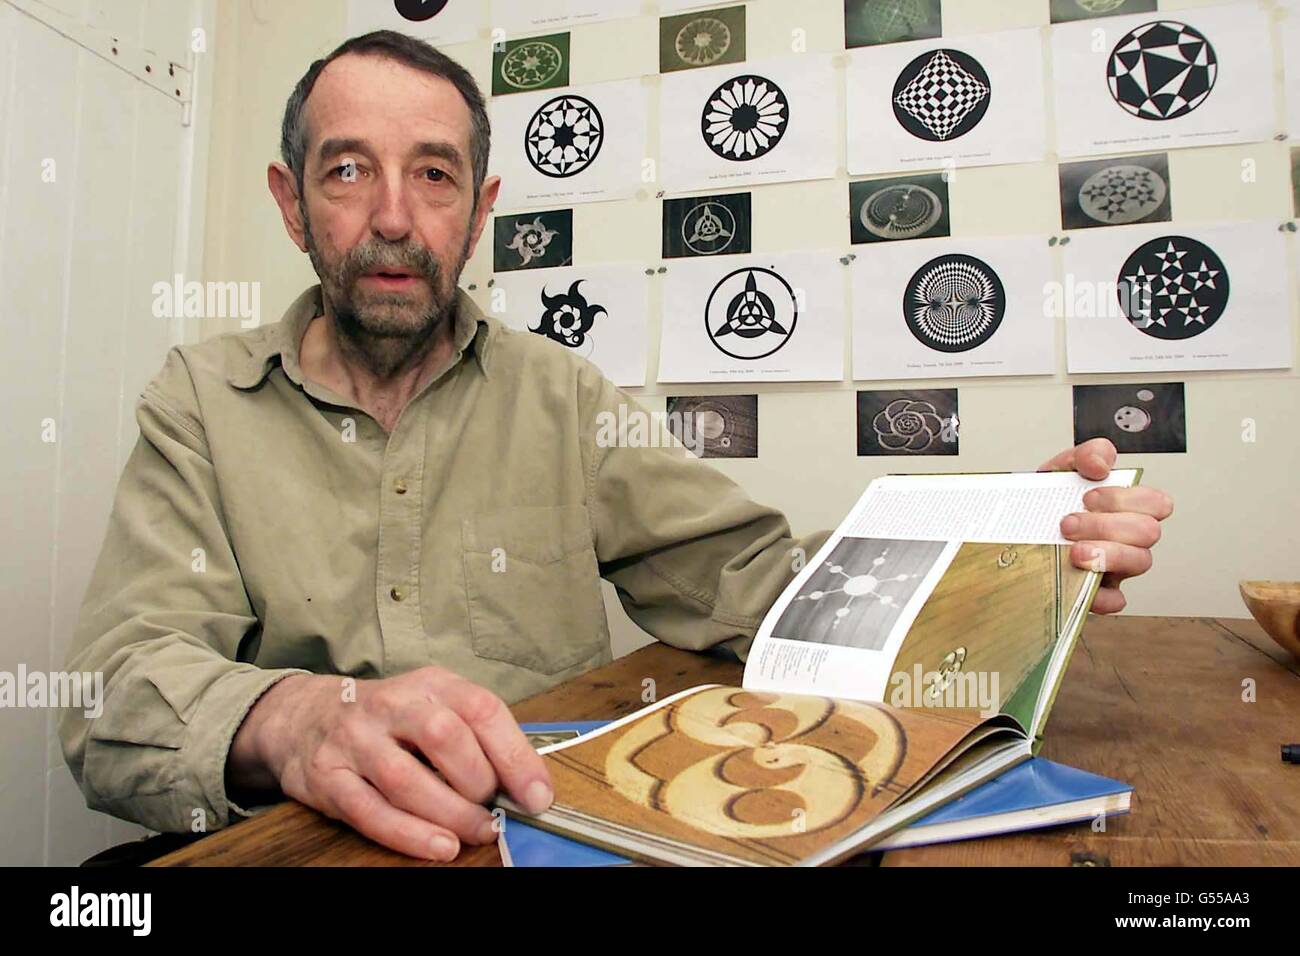 Crop circle expert Michael Glickman from Horton in Wiltshire, who claims the infamous markings are made by visiting aliens. His opinions conflict with those of Matthew Williams 29, who was convicted at Devizes Magistrate's Court of making crop circles. *... in an attempt to disprove Mr Glickman's theories. After creating and photographing an intricate seven pointed star in a Wiltshire field, Mr Williams e-mailed a picture to an american expert who then passed it to Mr Glickman. Williams claimed in court that Glickman then informed the police. Stock Photo